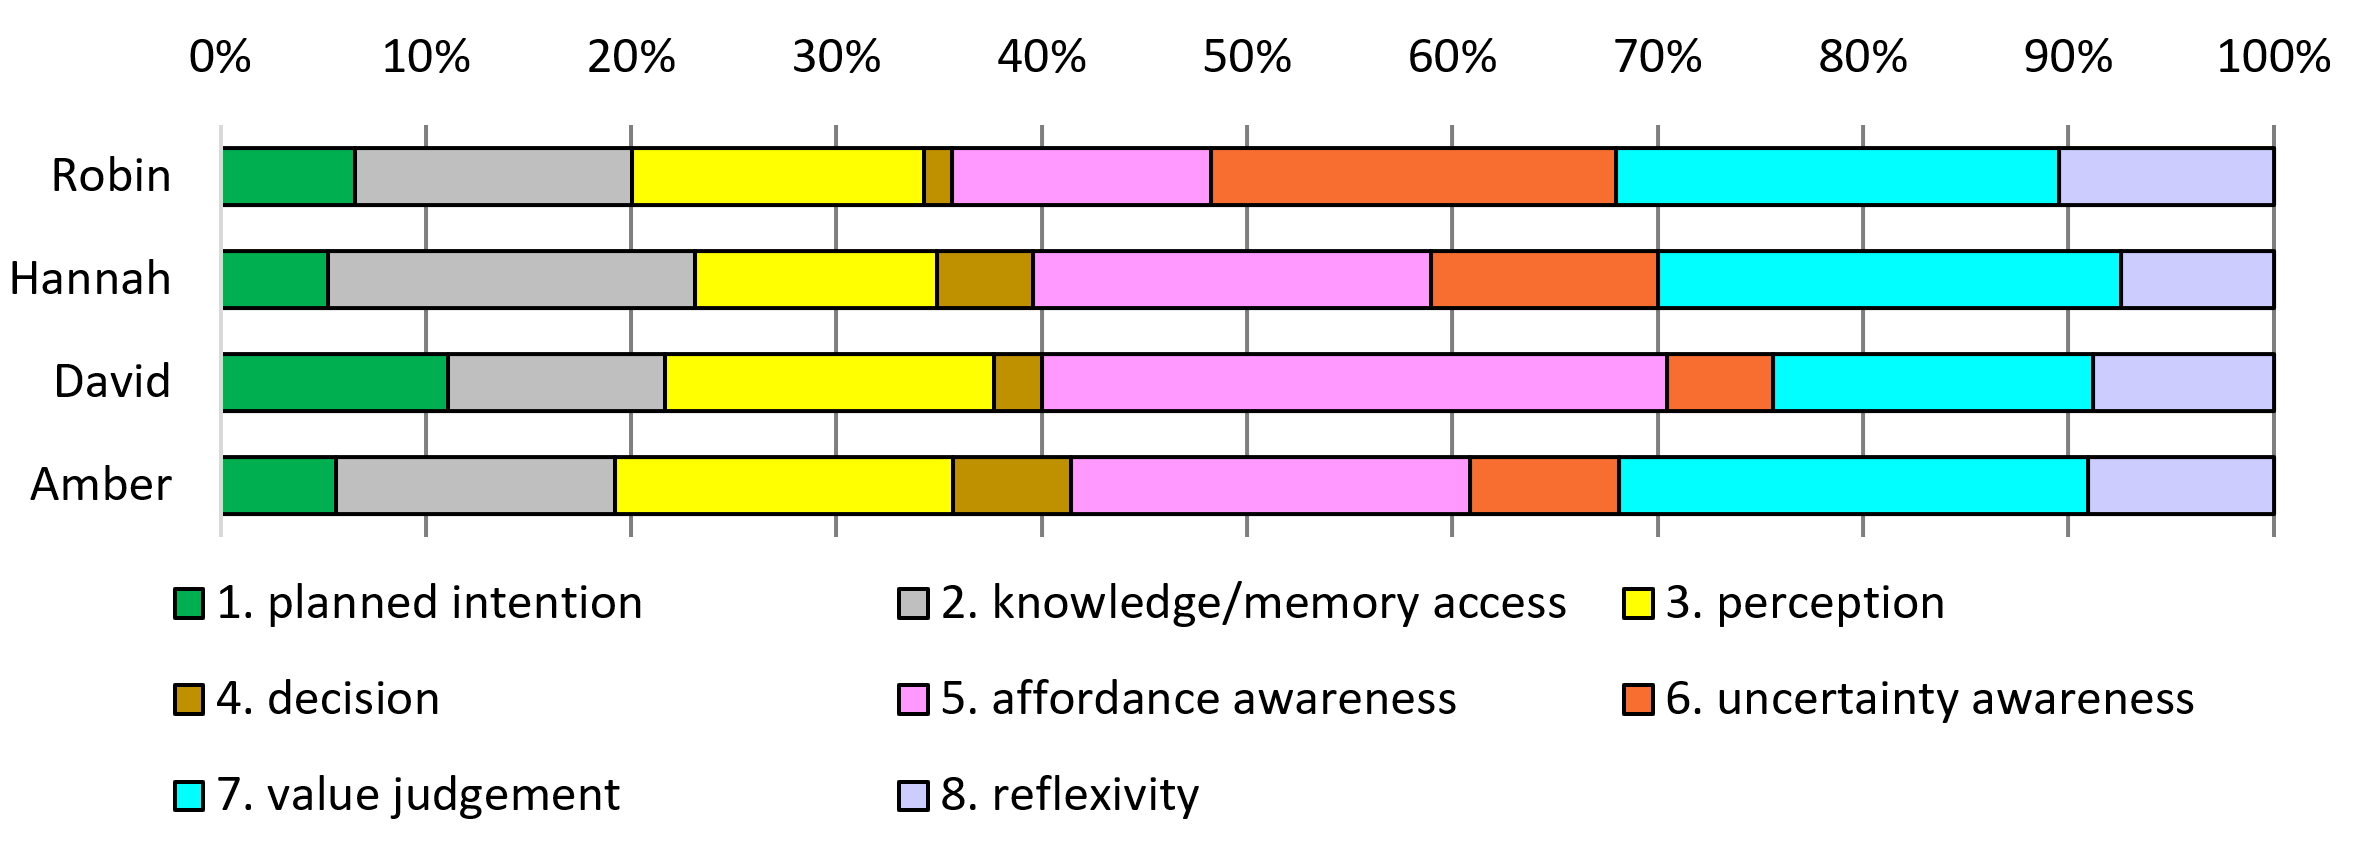 Figure 2. Relative frequencies of 8 thought categories